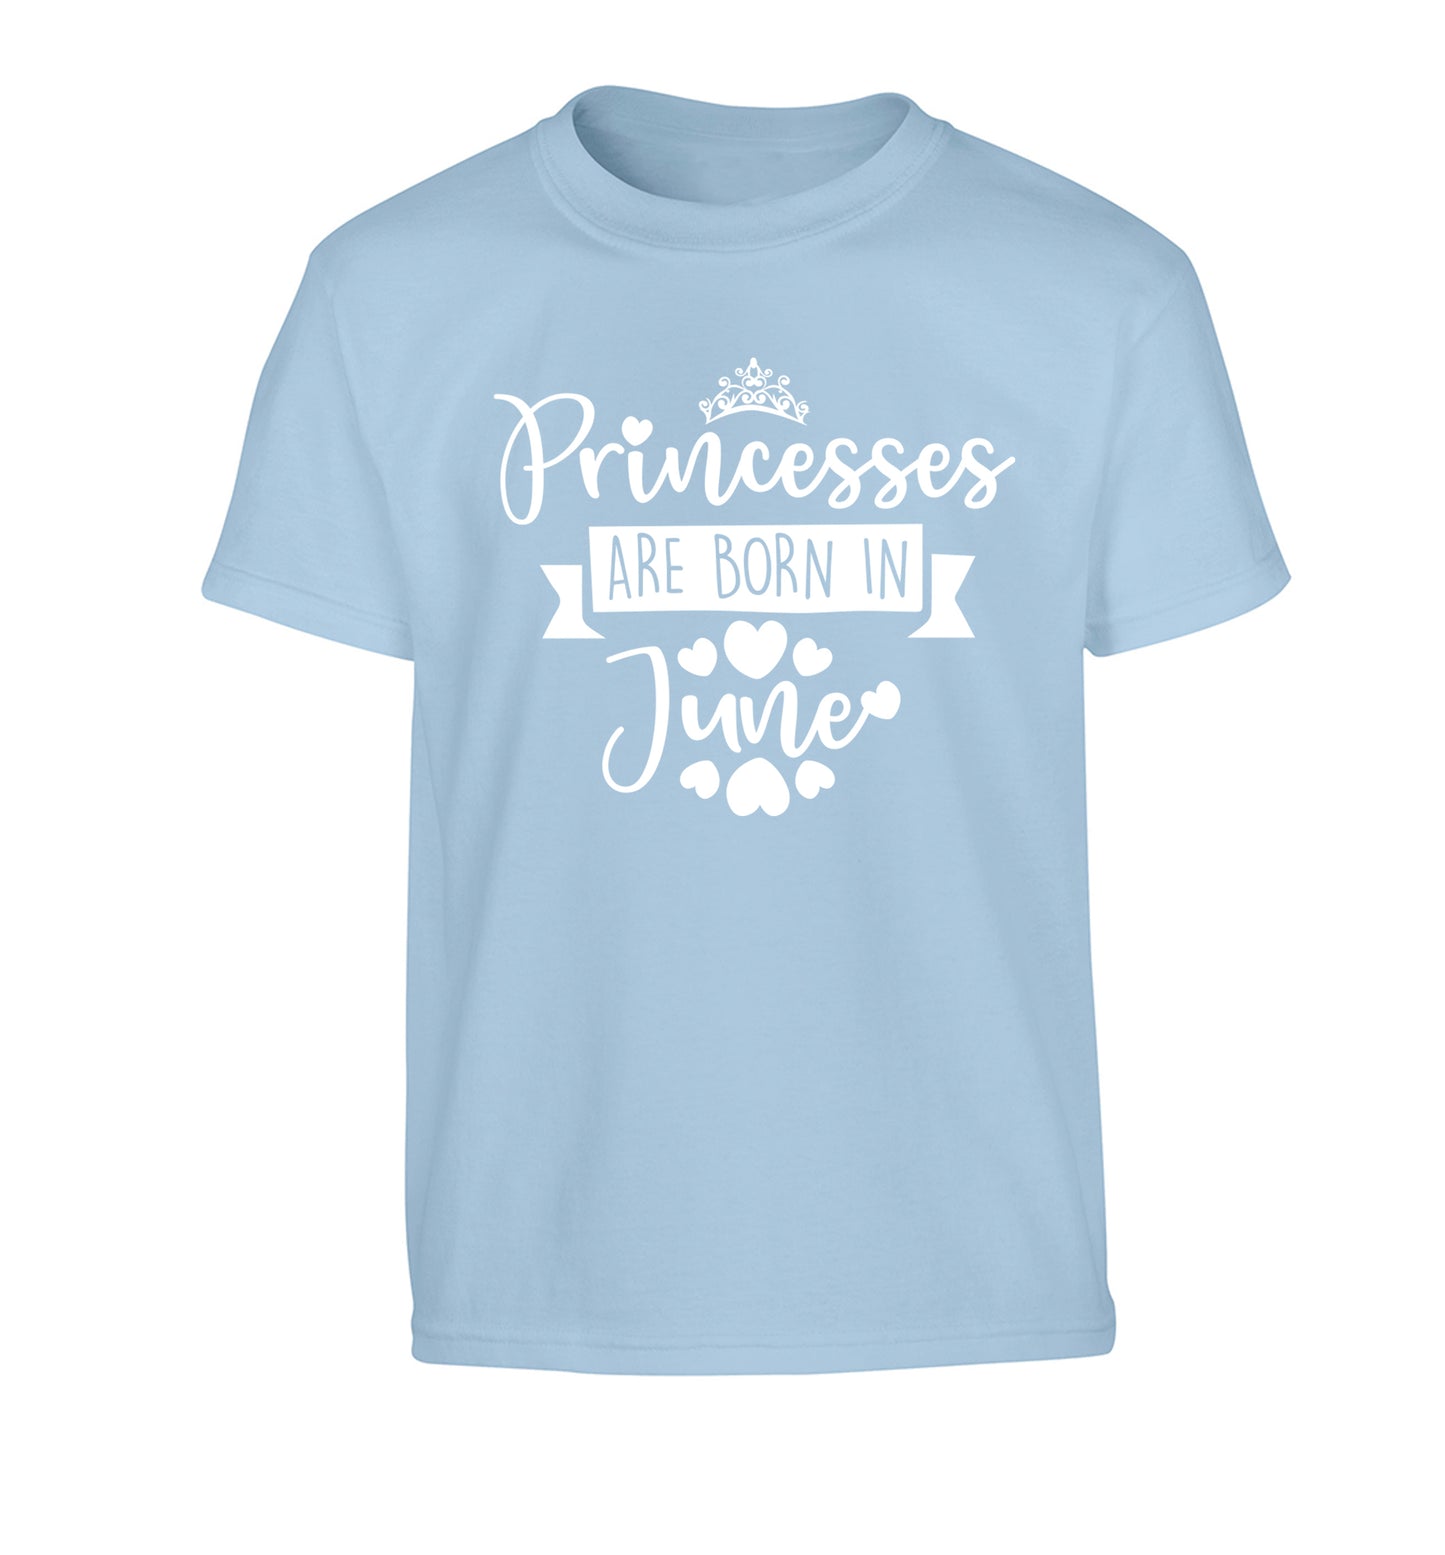 Princesses are born in June Children's light blue Tshirt 12-13 Years